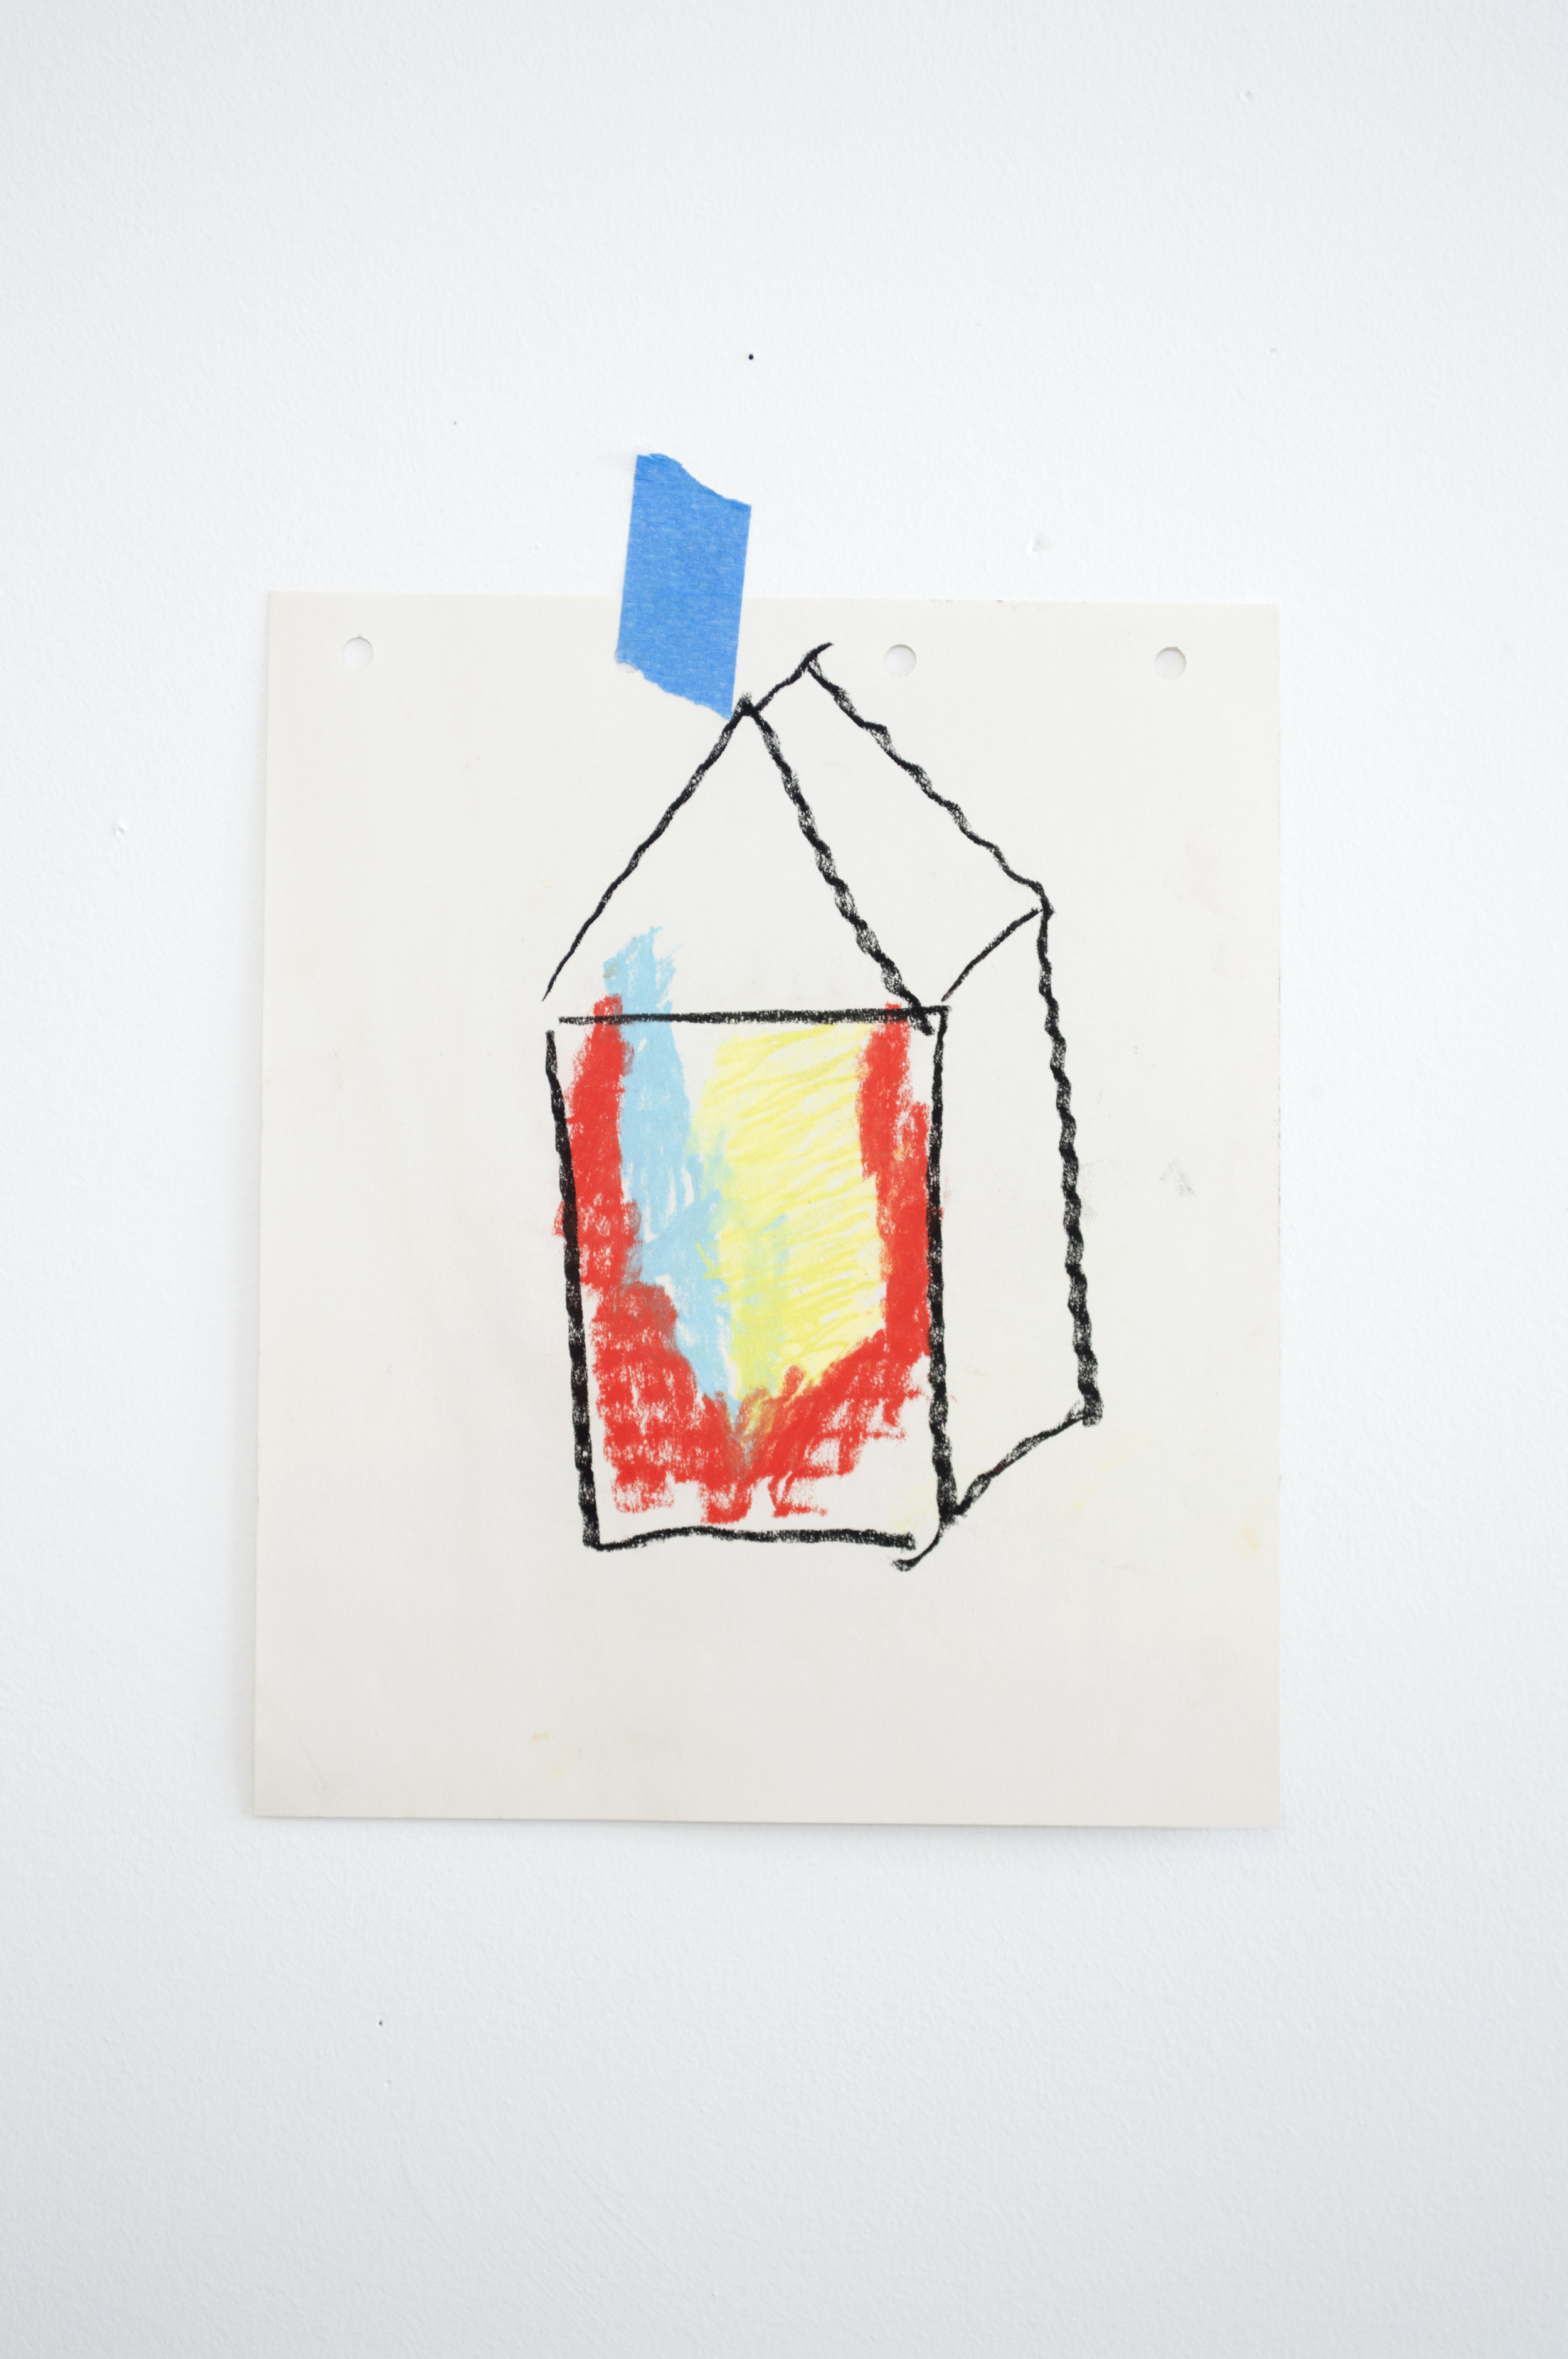 House Big/Playlist Series  2015  Pastel and painter’s tape